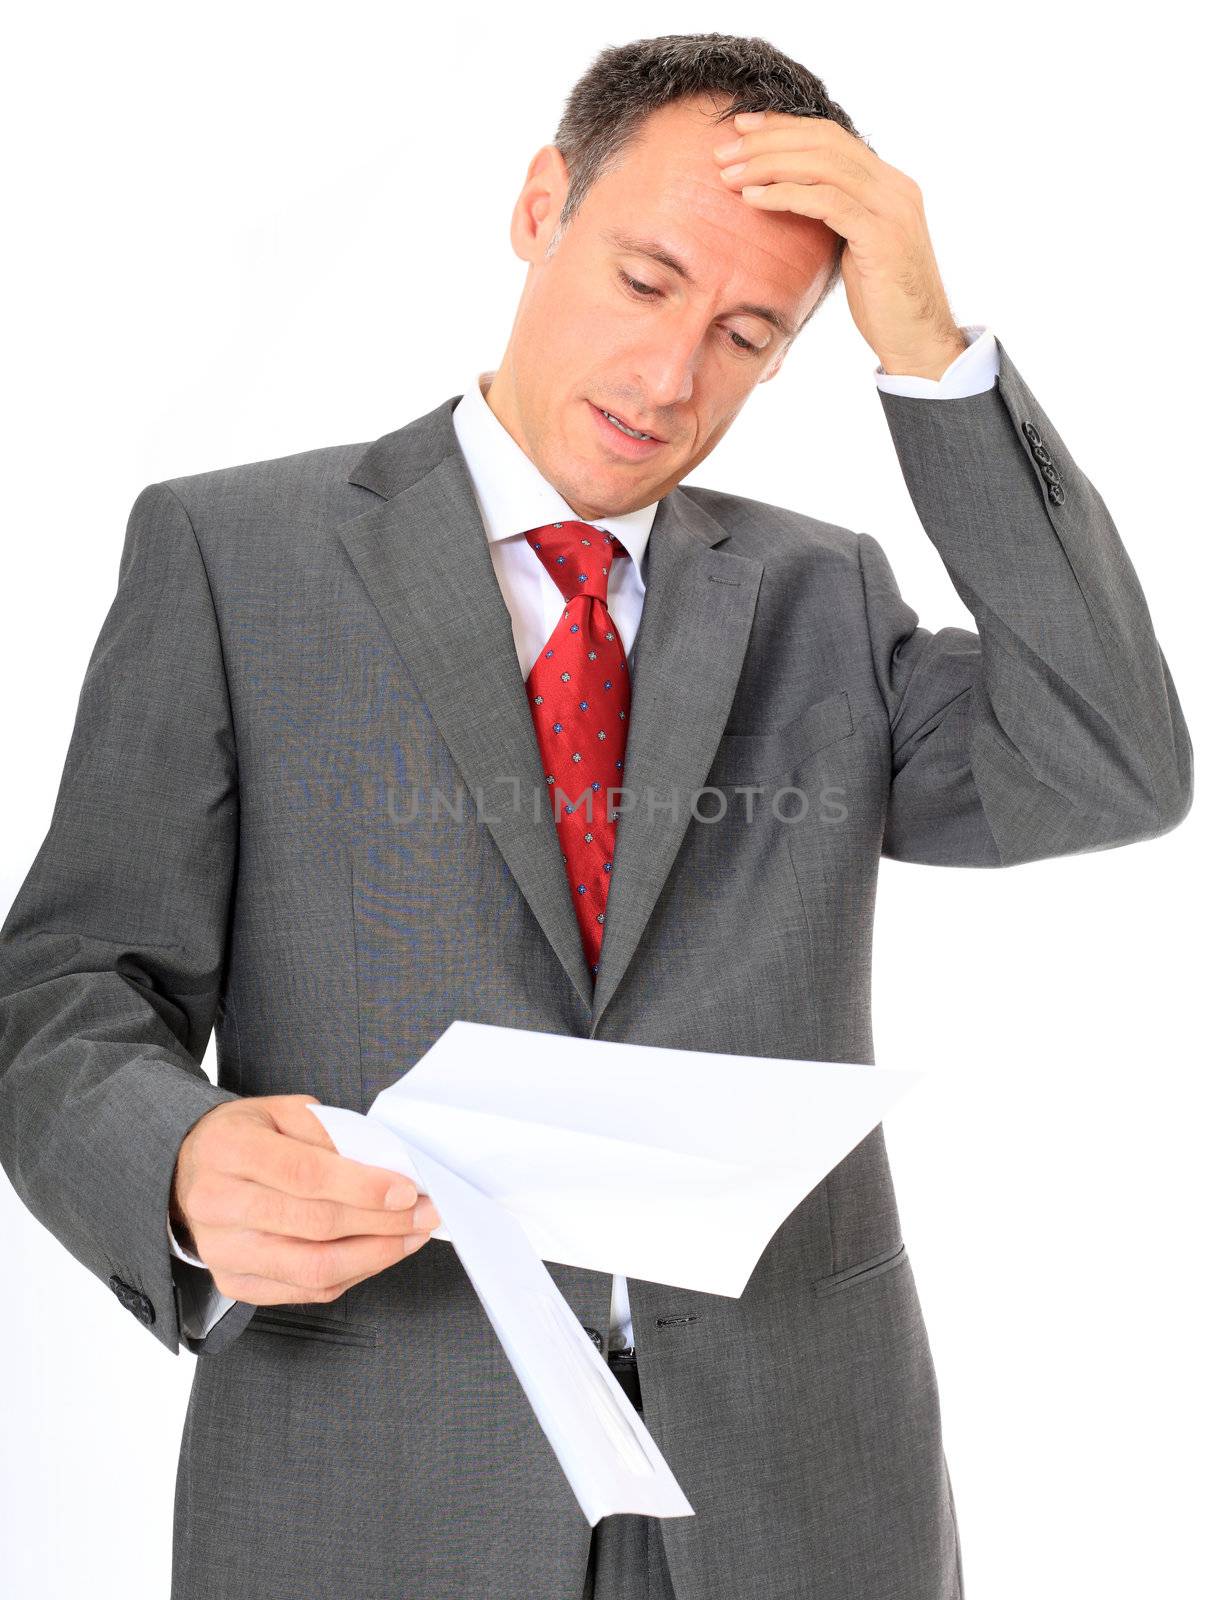 Attractive businessman gets bad news. All on white background.